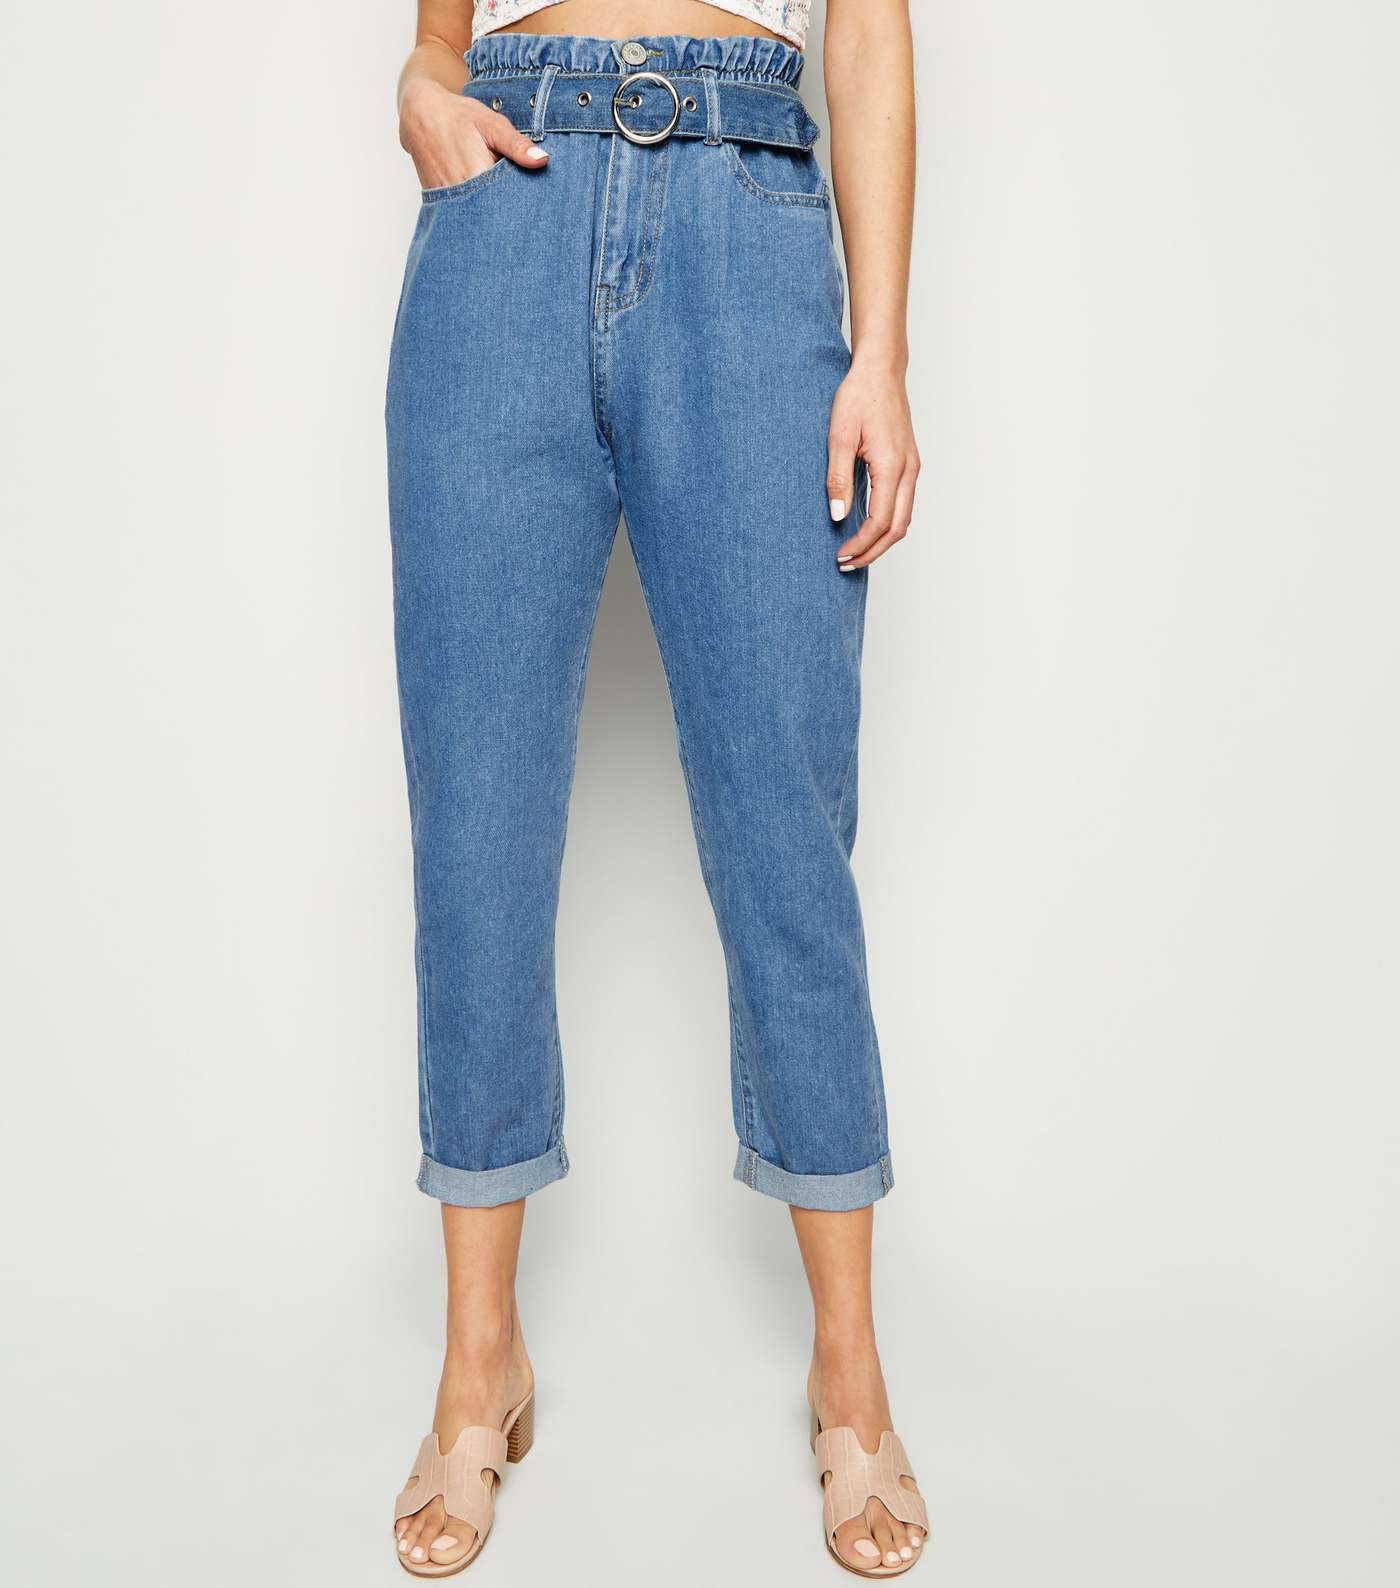 Blue Tapered High Waist Jeans Image 2